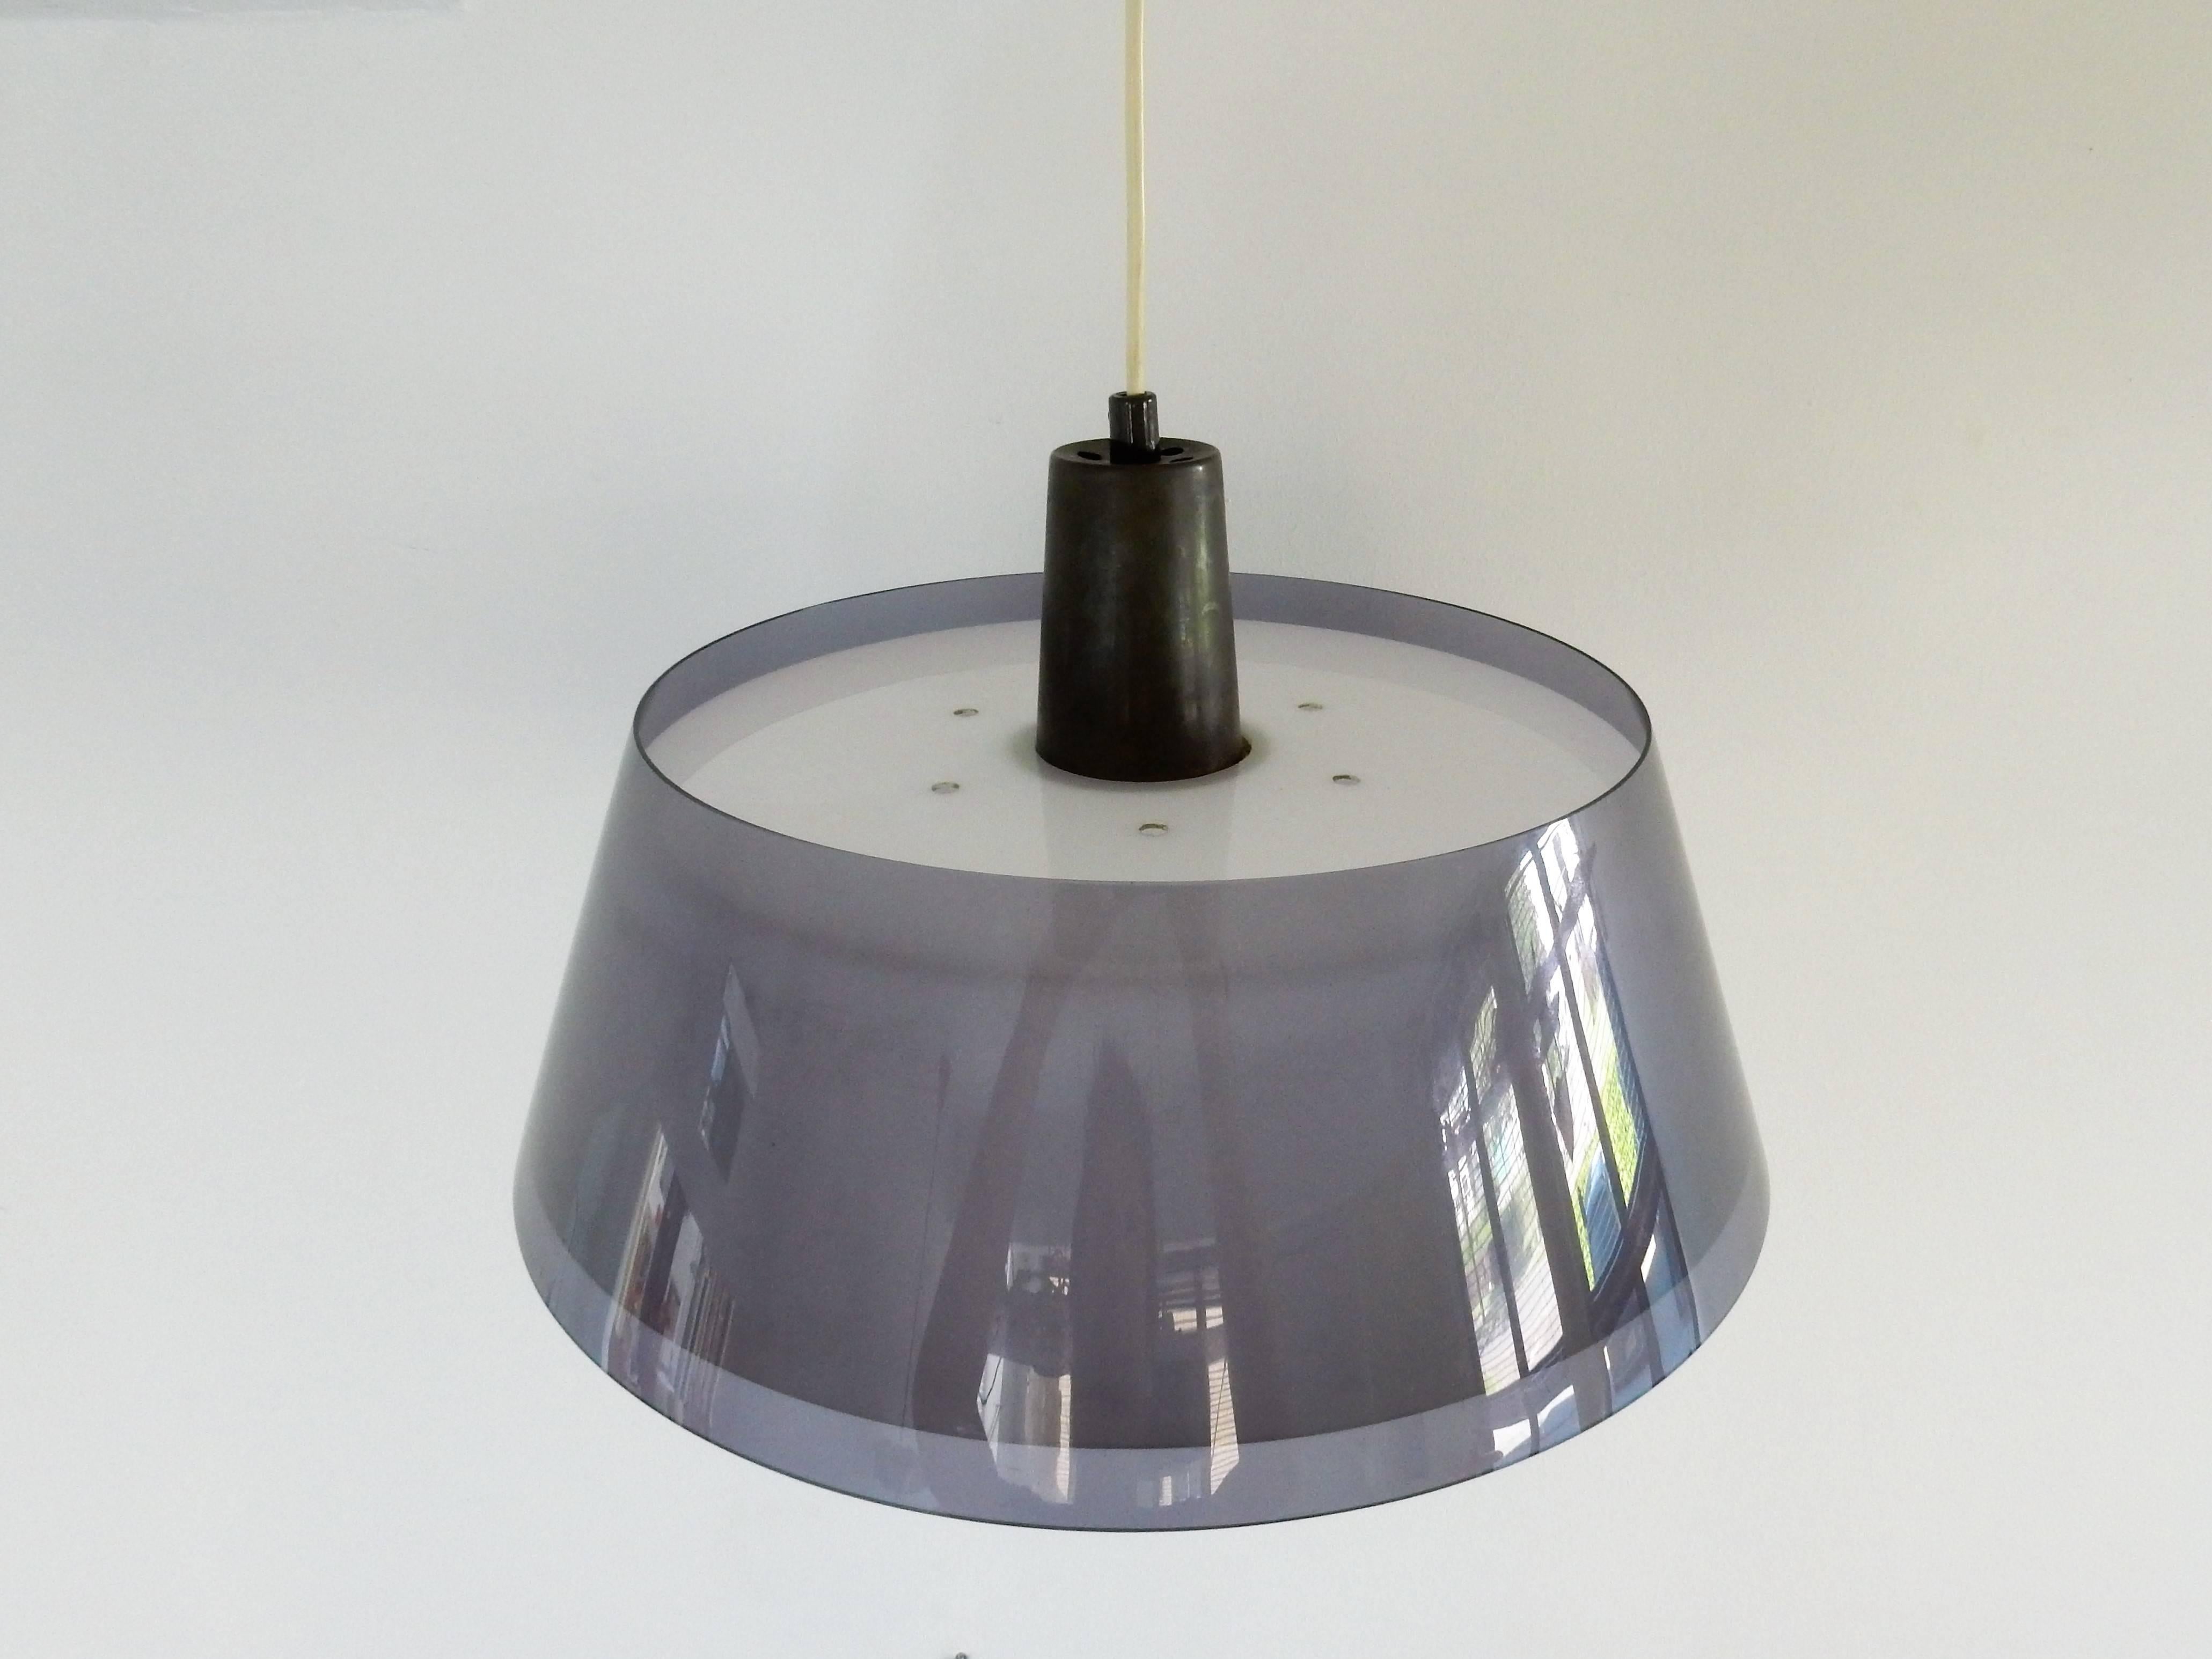 This nice grey and white acrylic pendant light was designed by Yki Nummi for Stockmann-Orno in the 1950's. The lamp is in a very good condition with some minor signs of age and use.

Yki Nummi is famous for his designs with the use of acryllics.